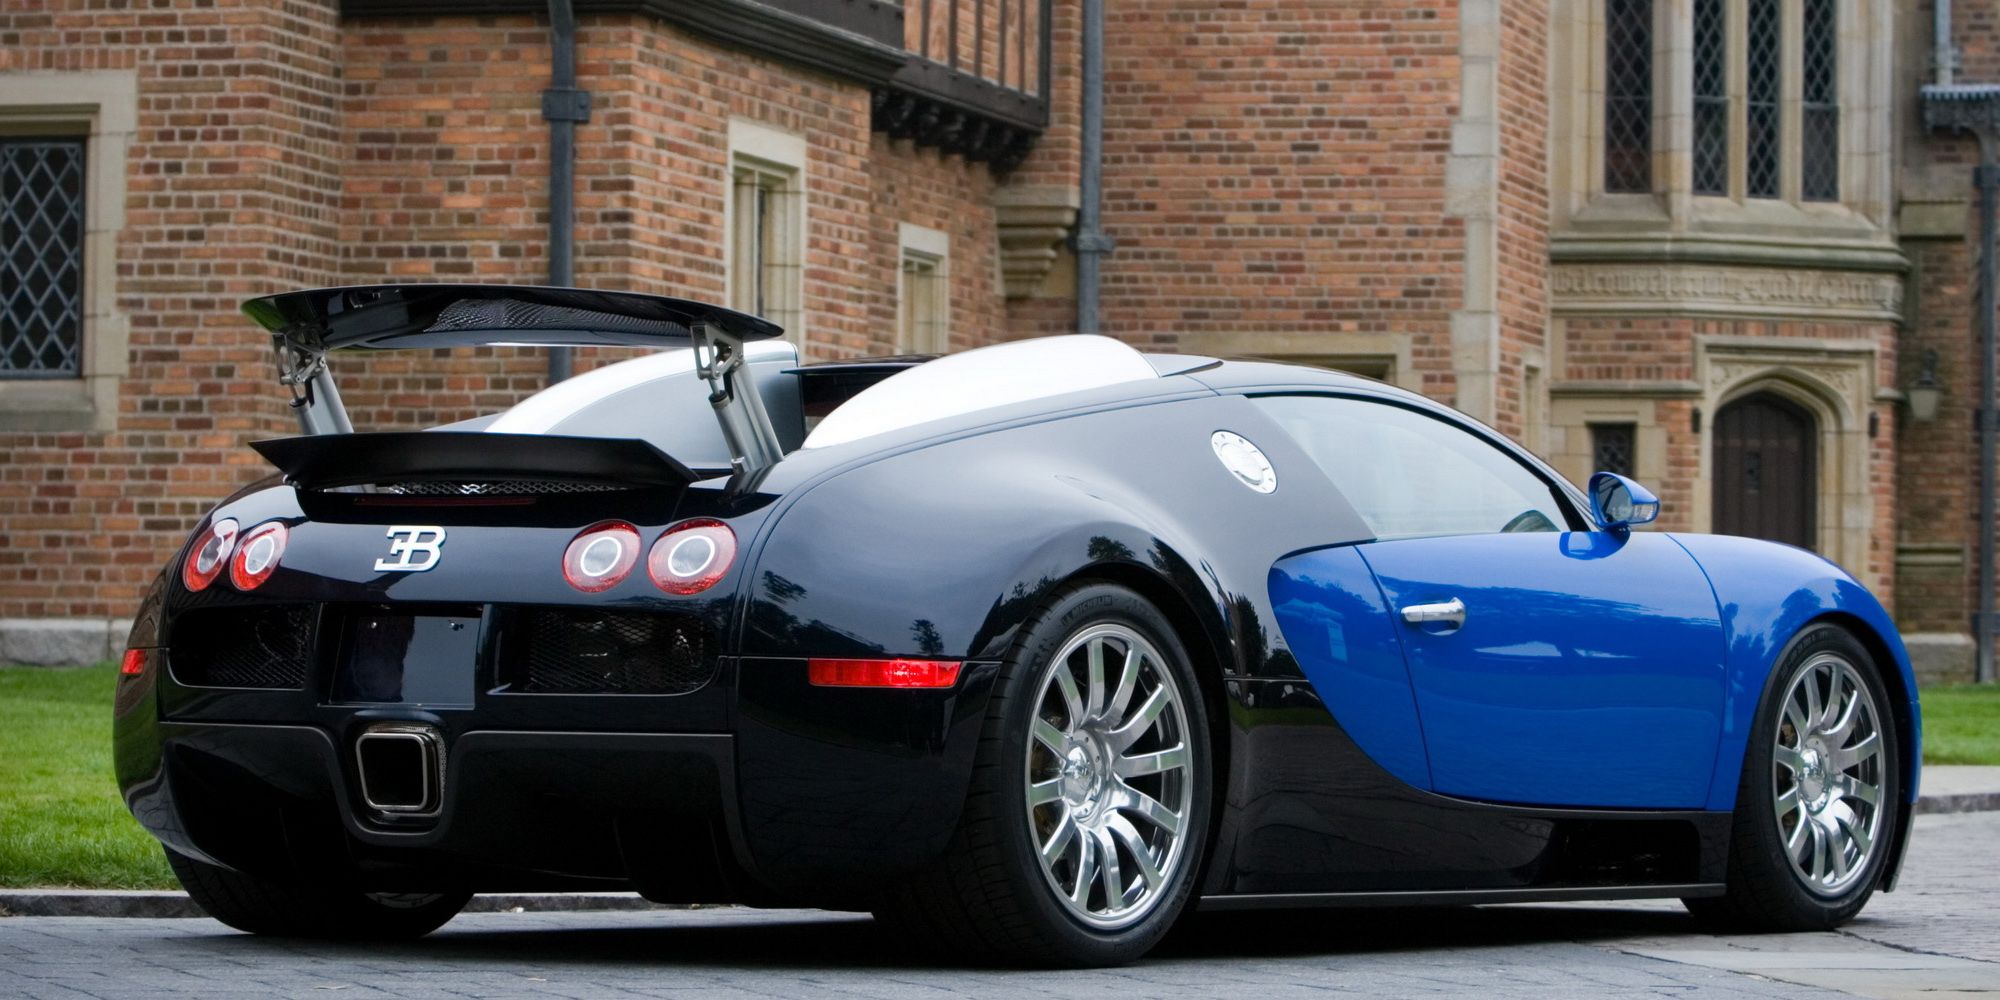 Rear 3/4 view of the Veyron 16.4